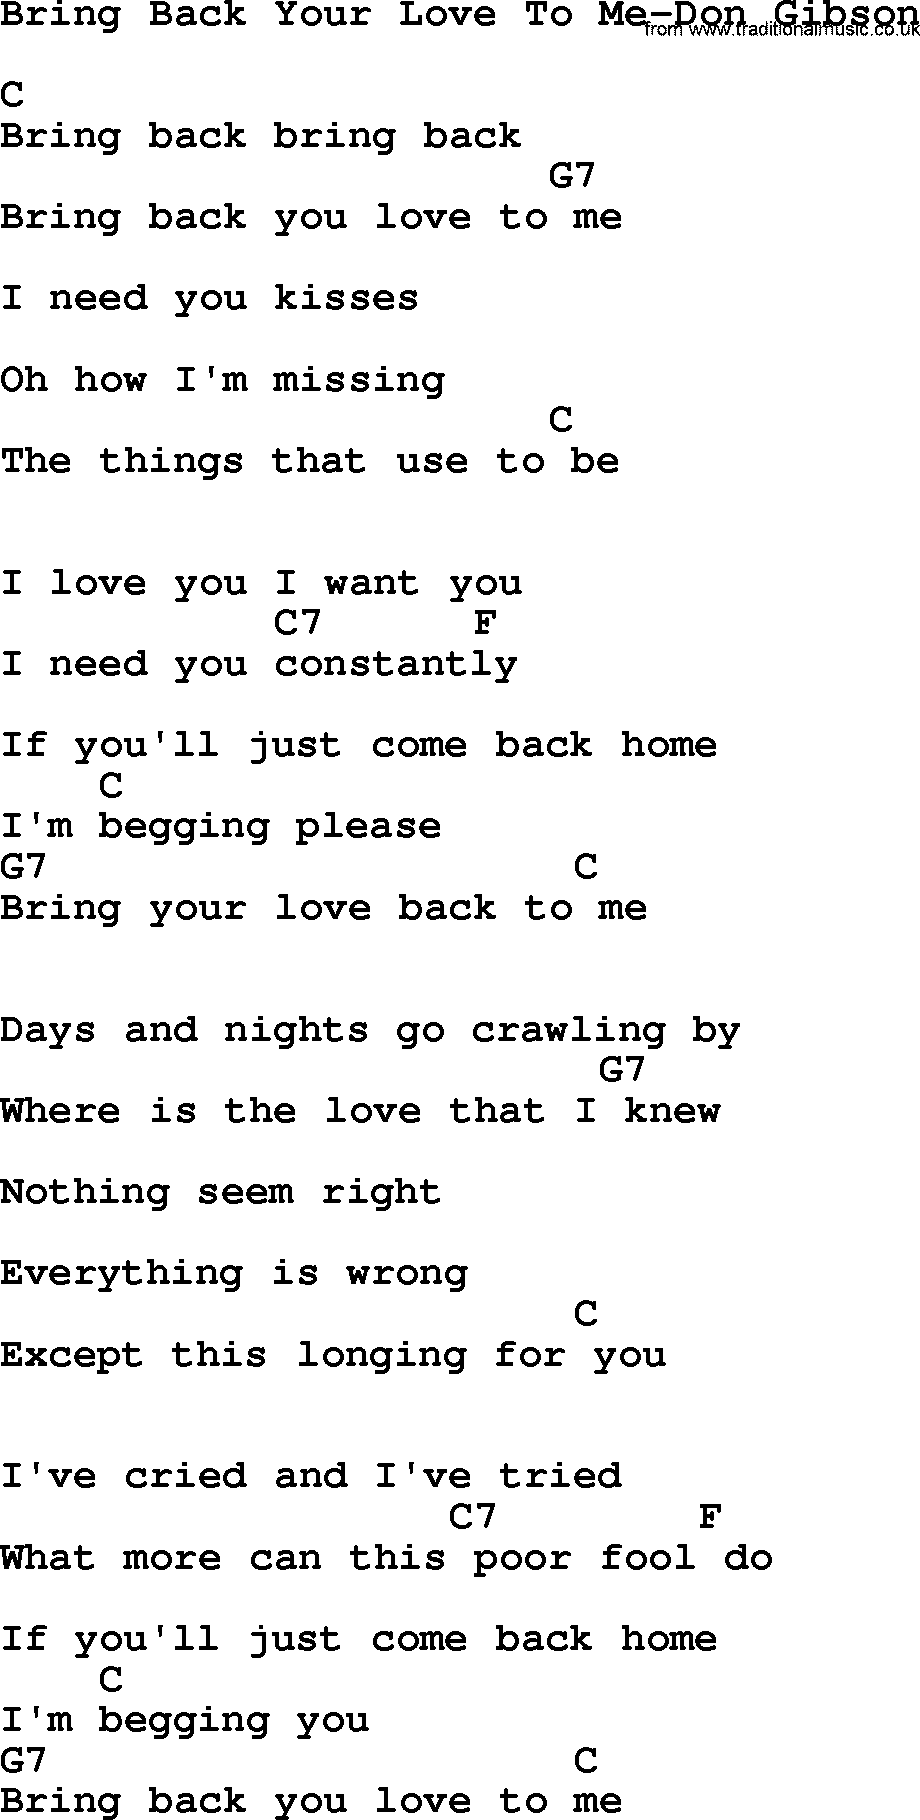 Country music song: Bring Back Your Love To Me-Don Gibson lyrics and chords